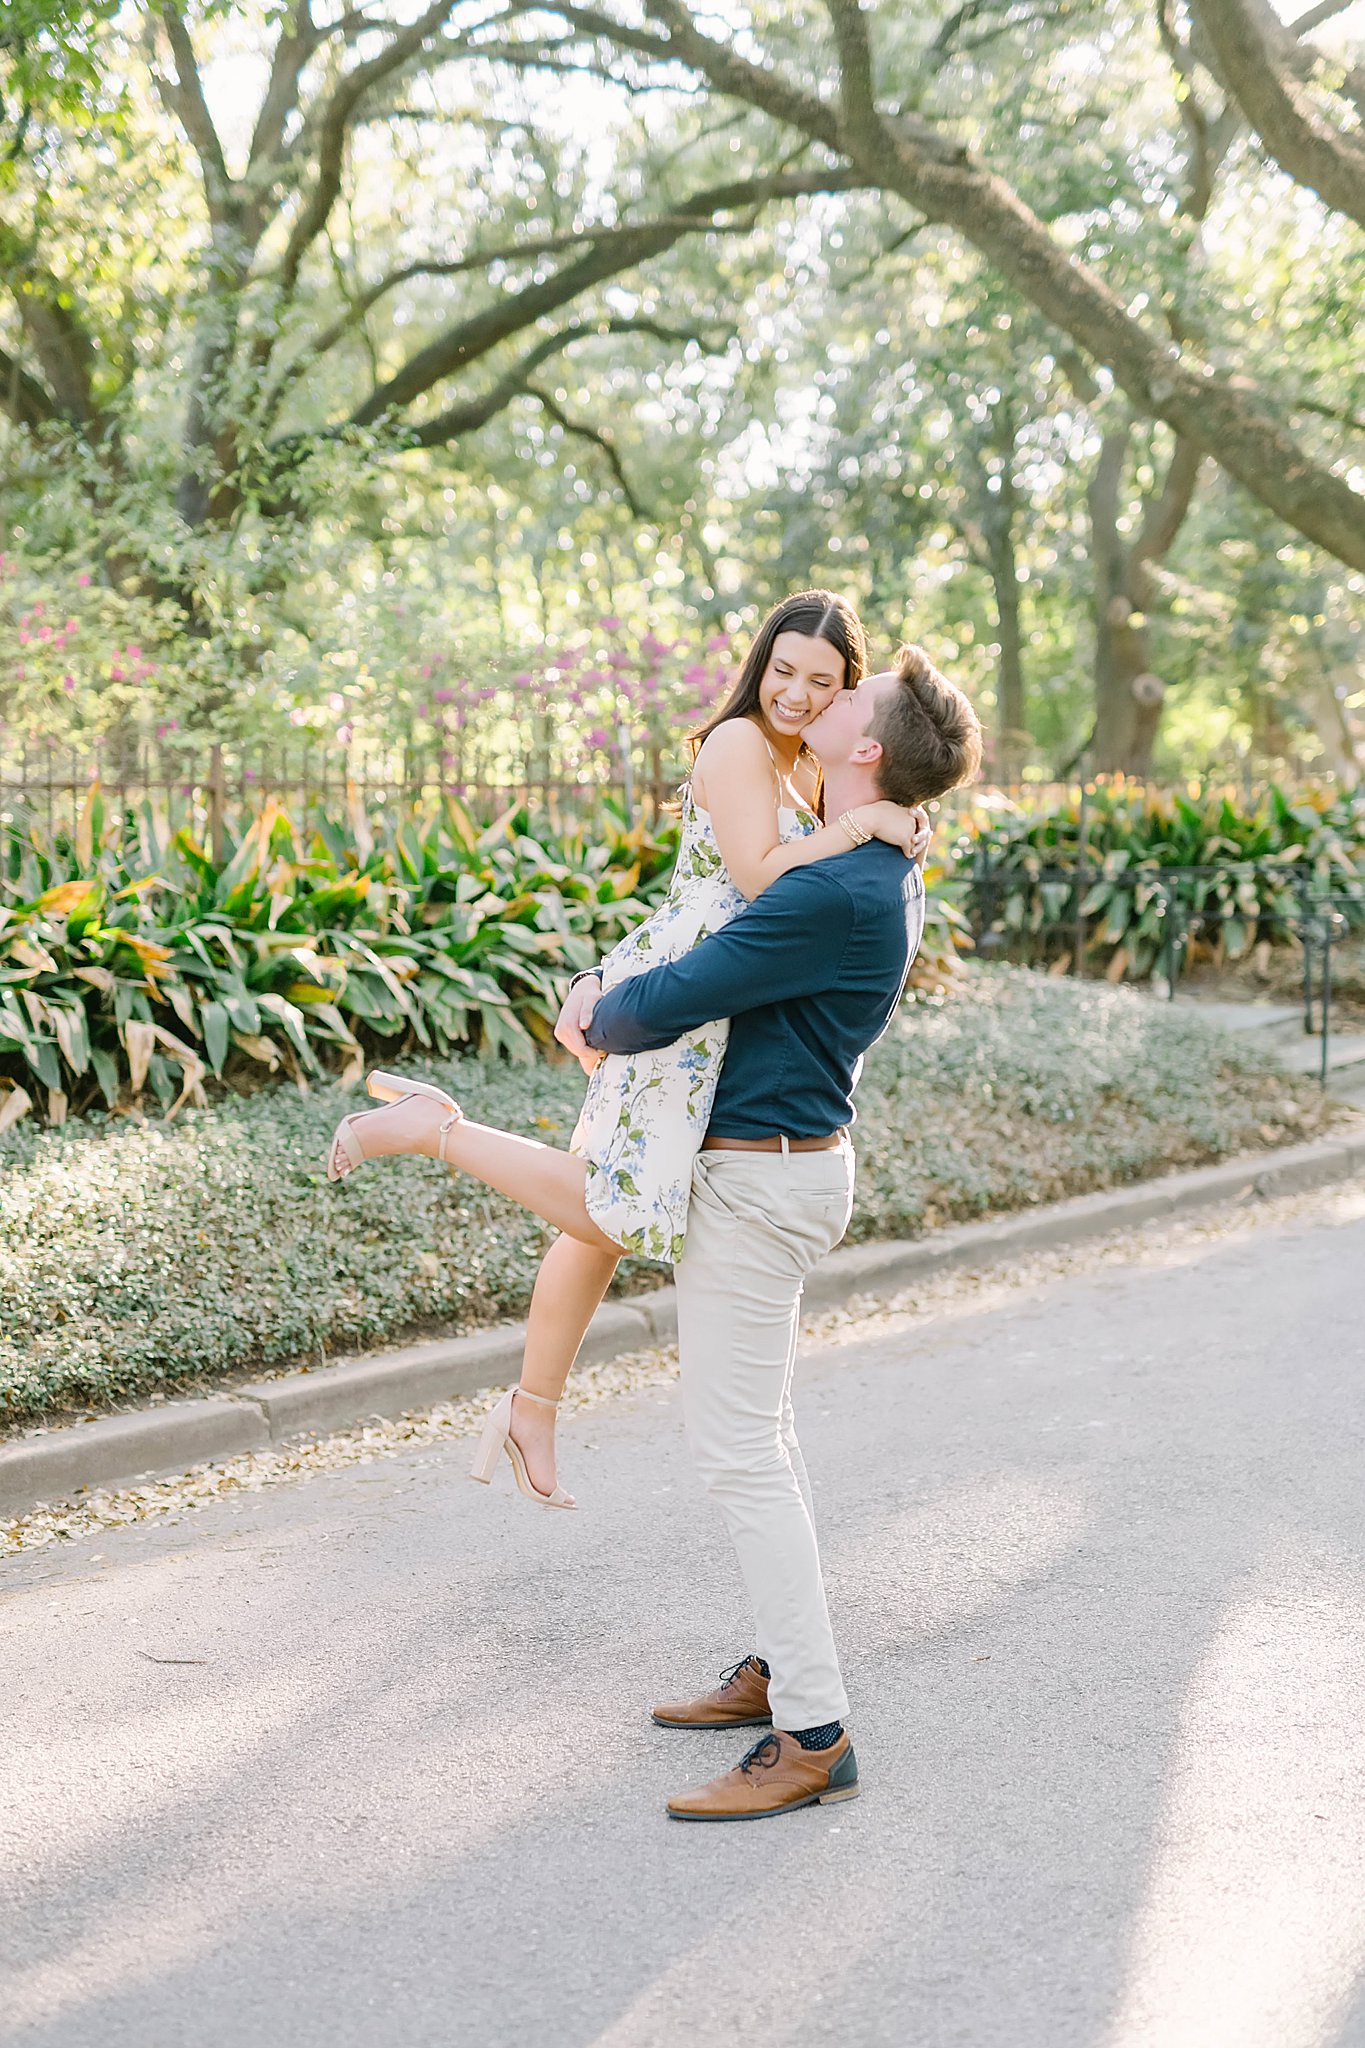 Man lifts bride to be and kisses her cheek during their Houston engagement session.